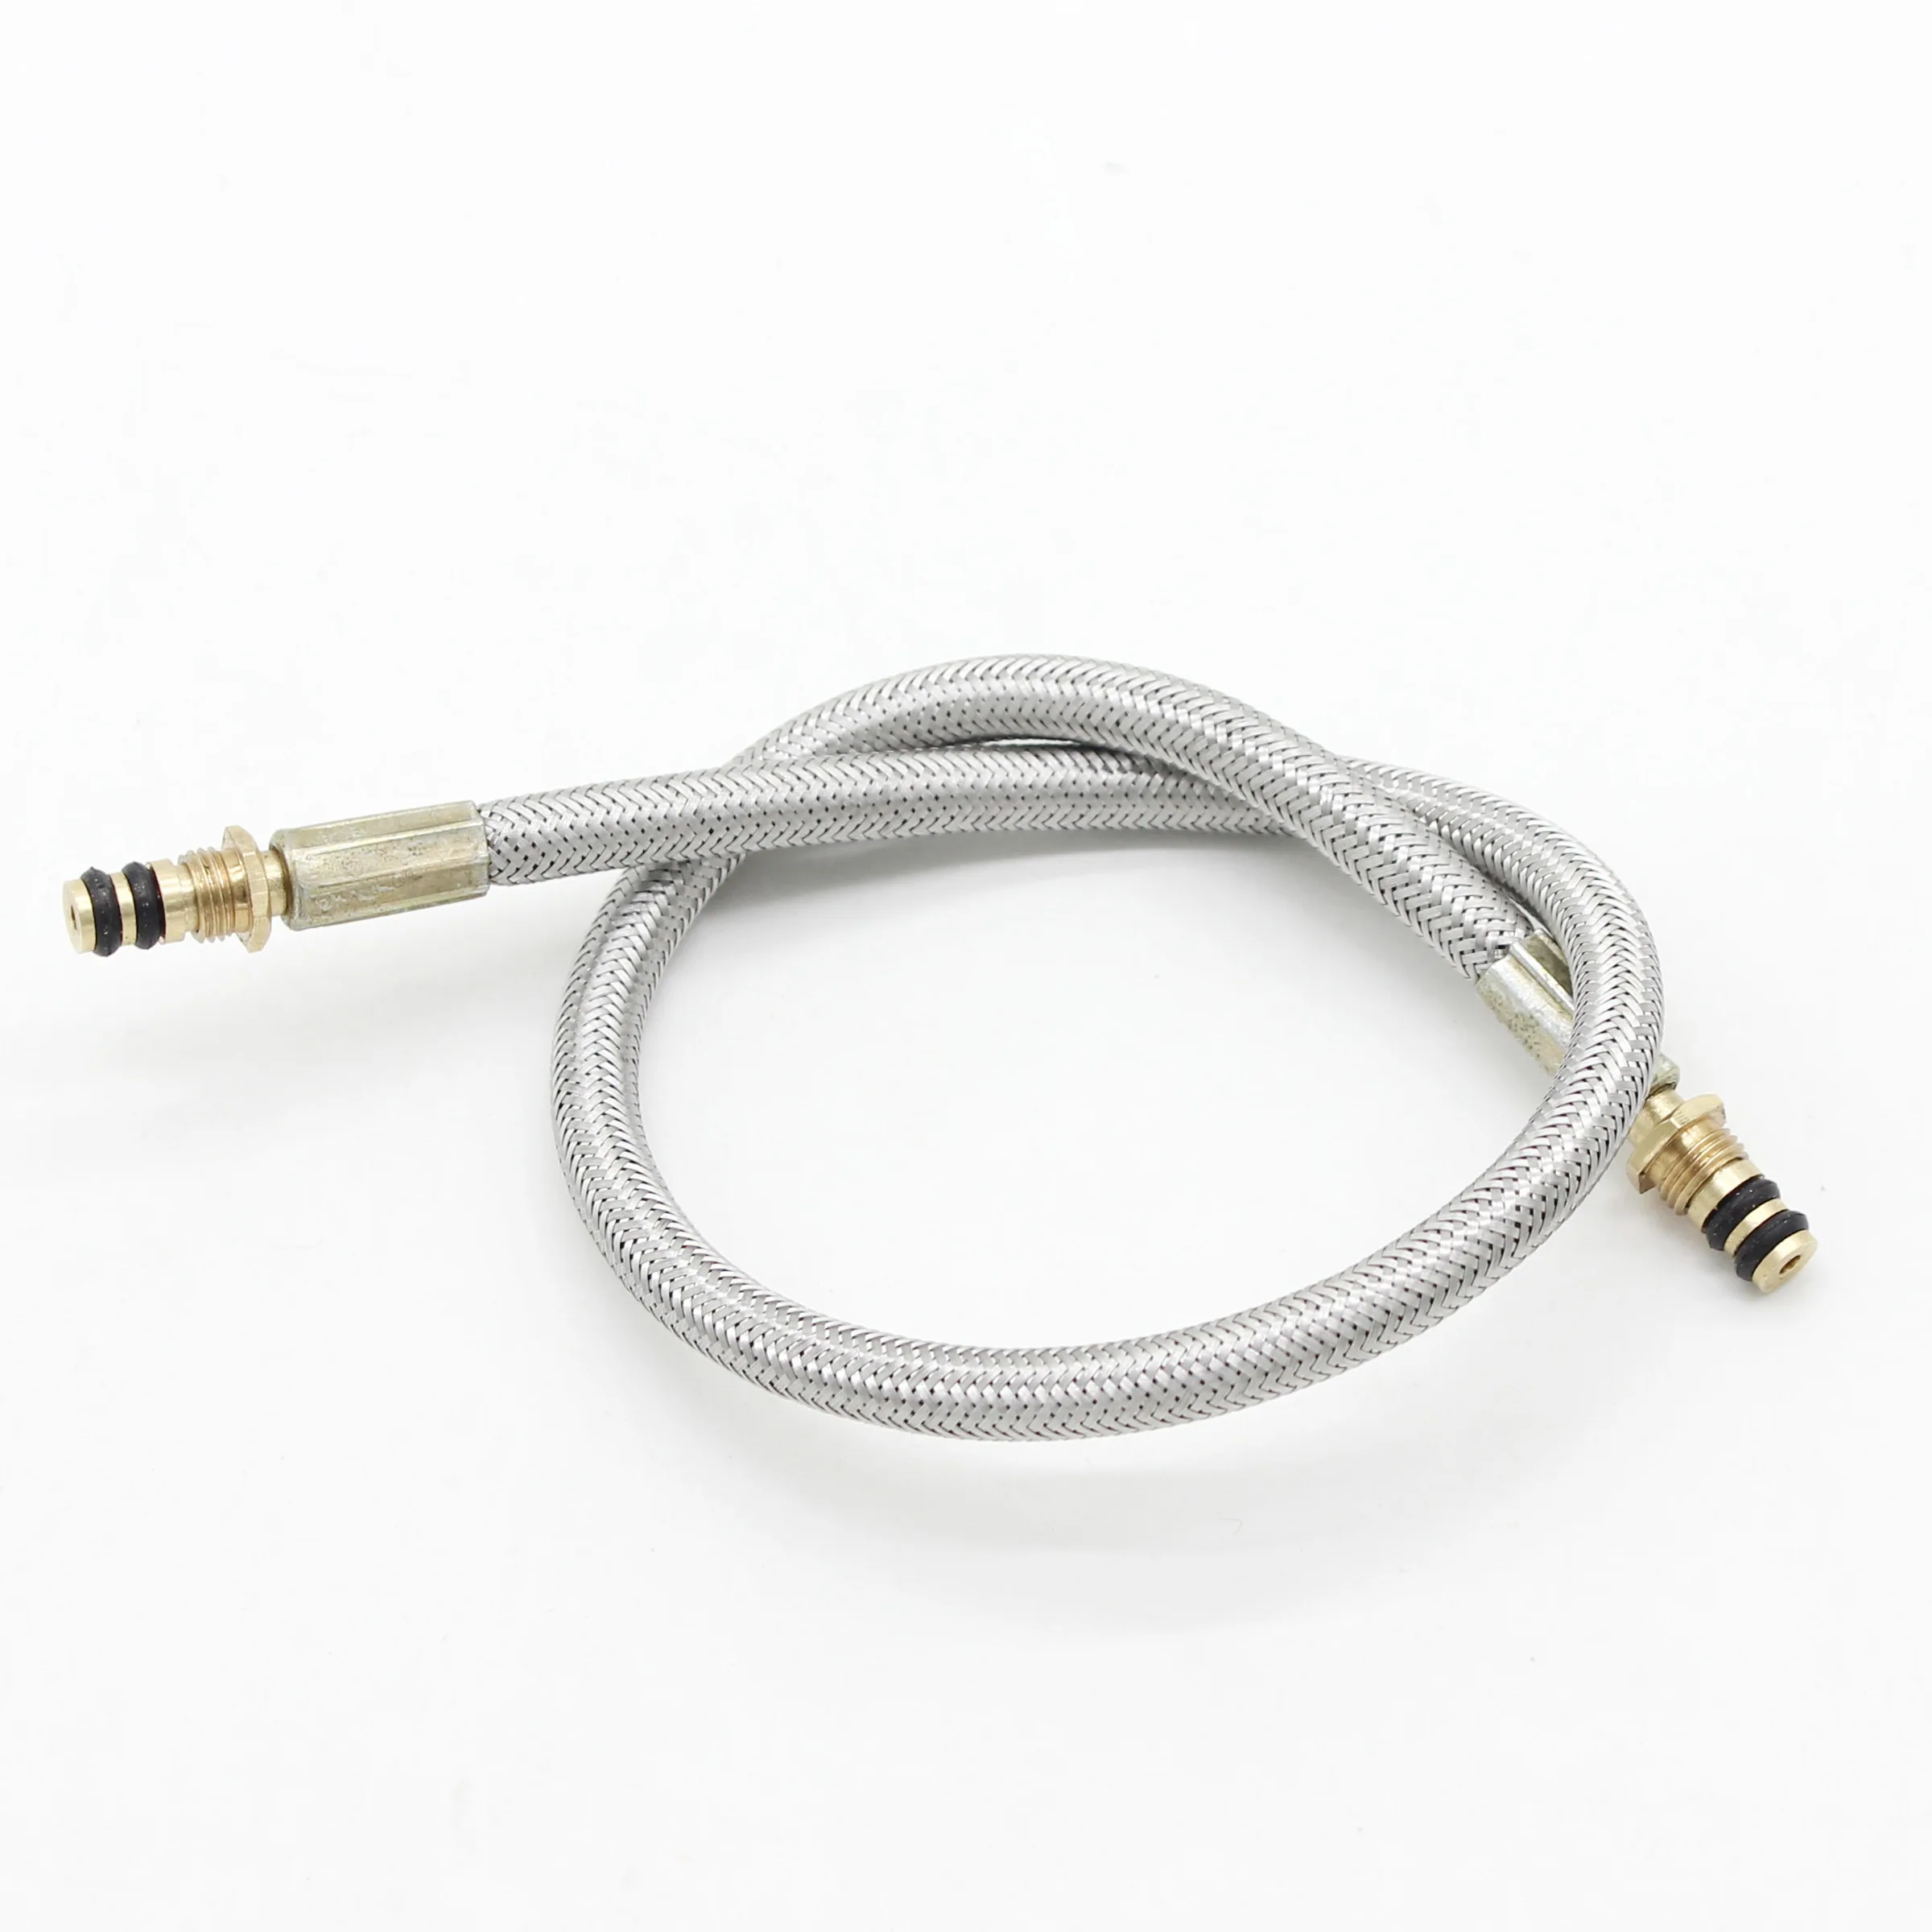 Outdoor Camping Stove Replacement Extend Tube Adapter Extended Gas Hose Extension Accessories